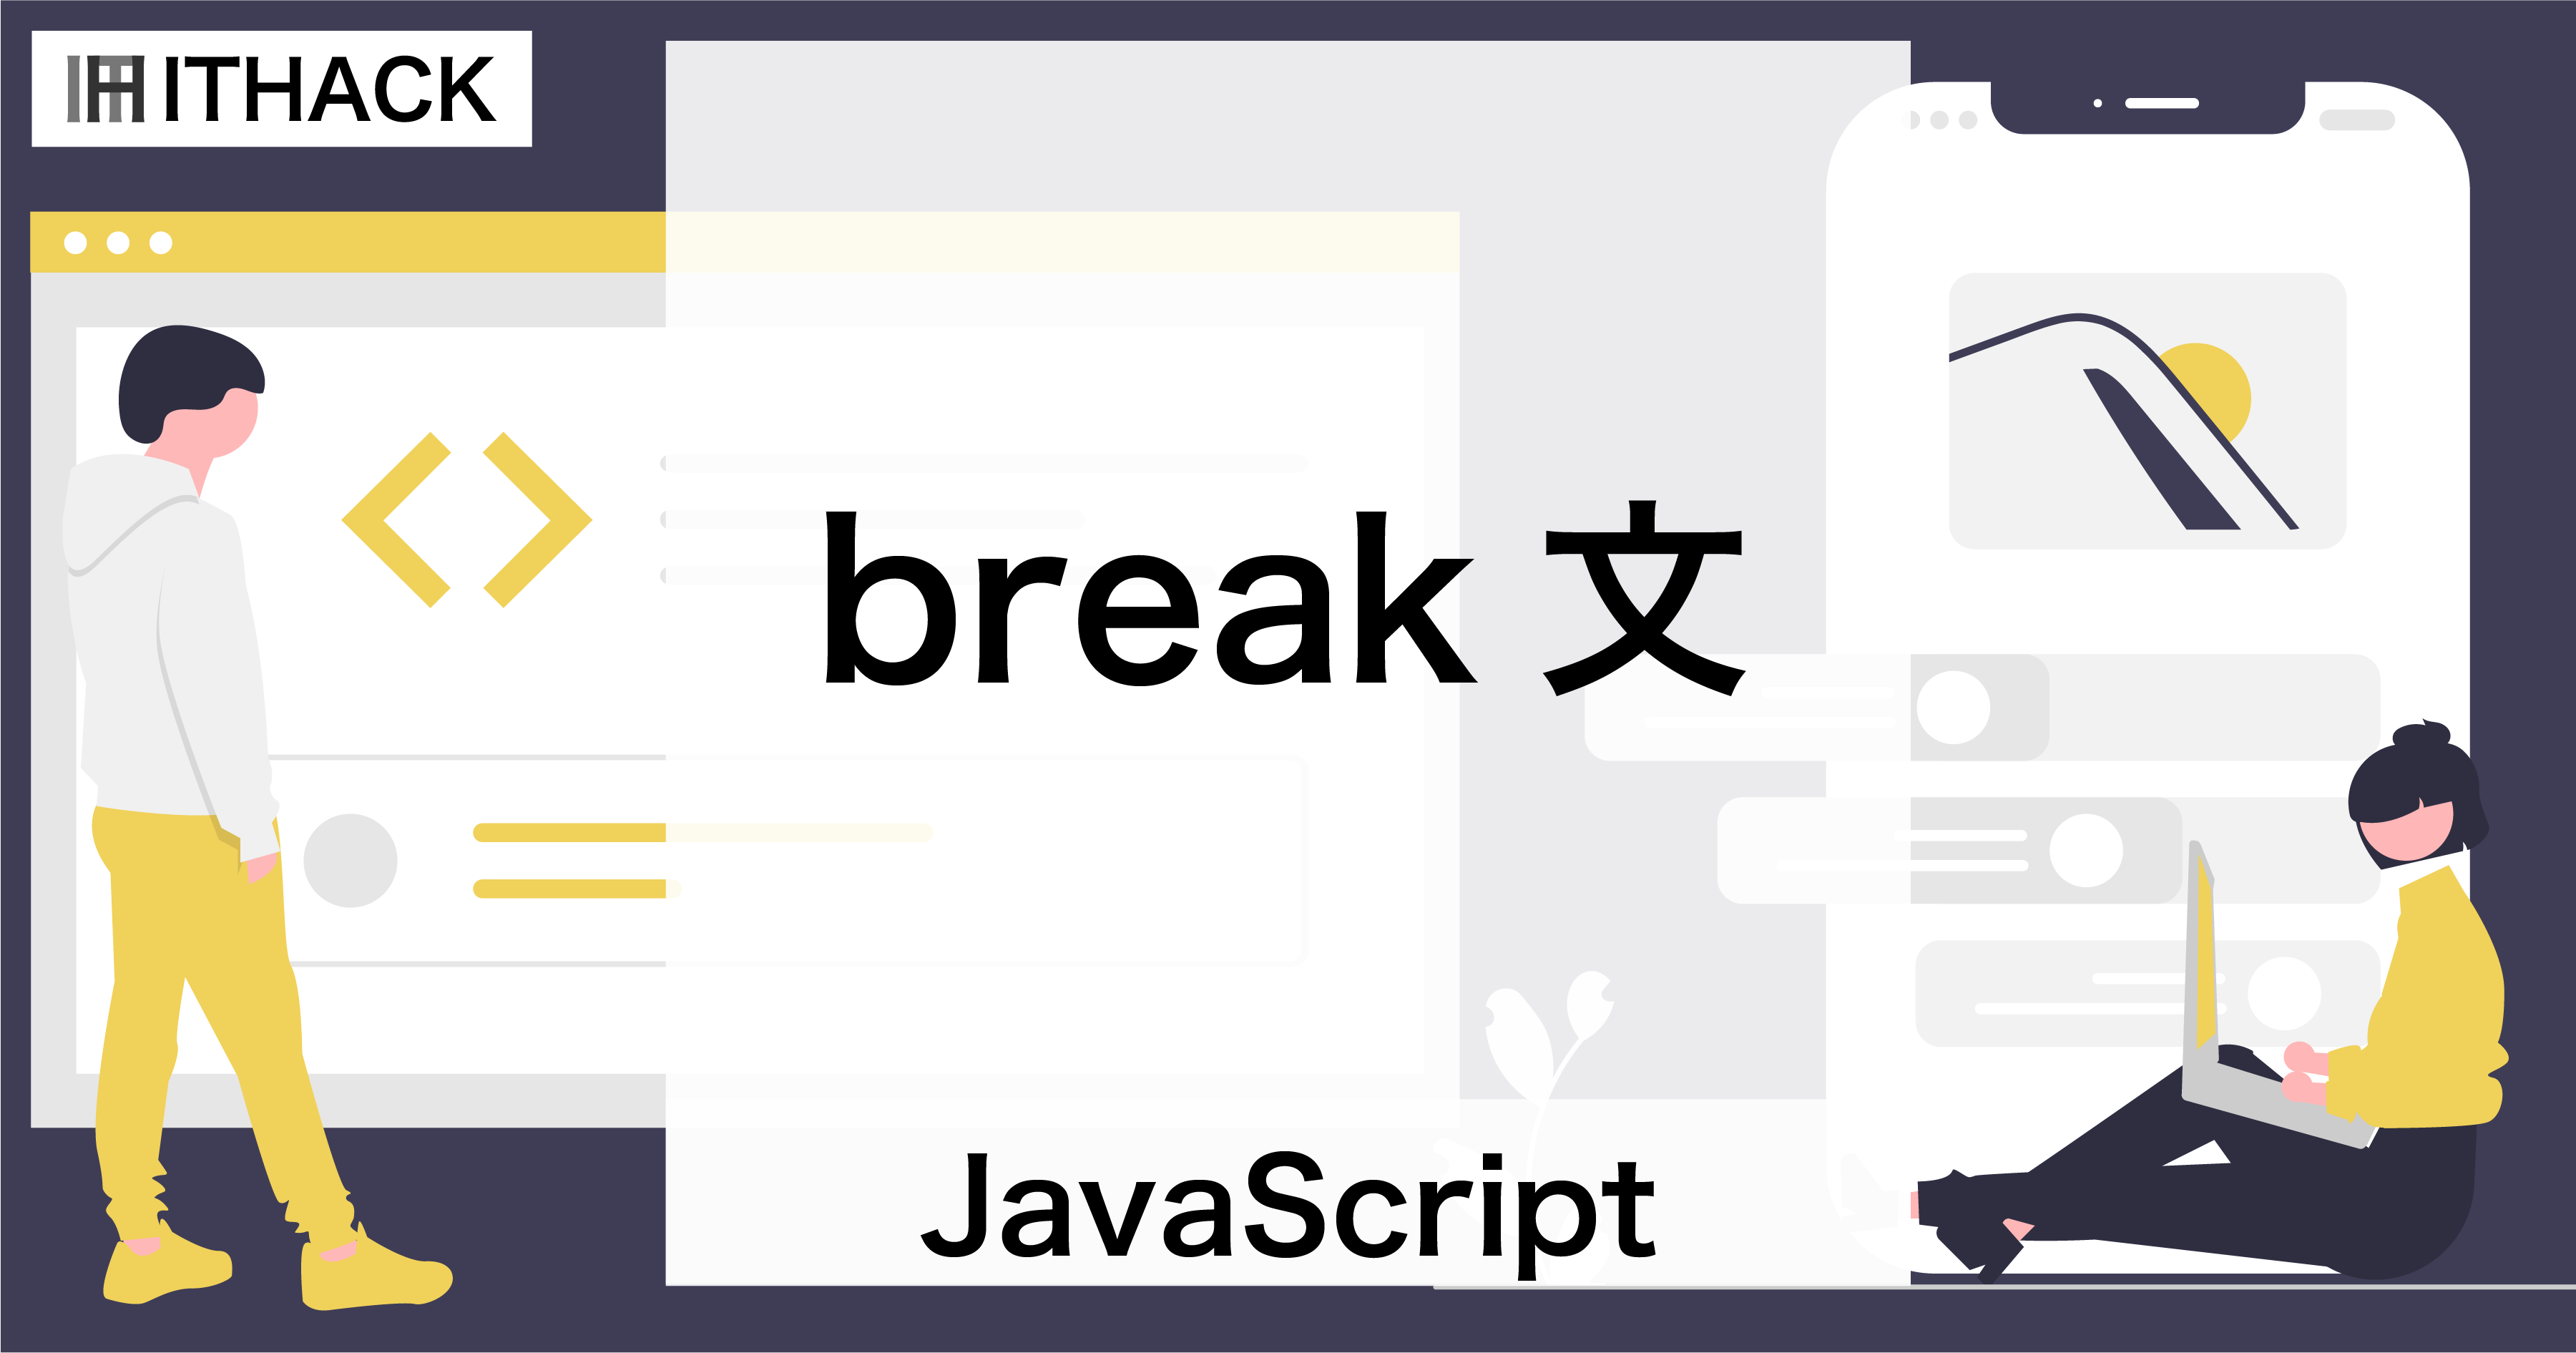 【JavaScript】break文 - 繰り返し処理や分岐処理の中断（for/for-of/for-in/while/do-while/switch)